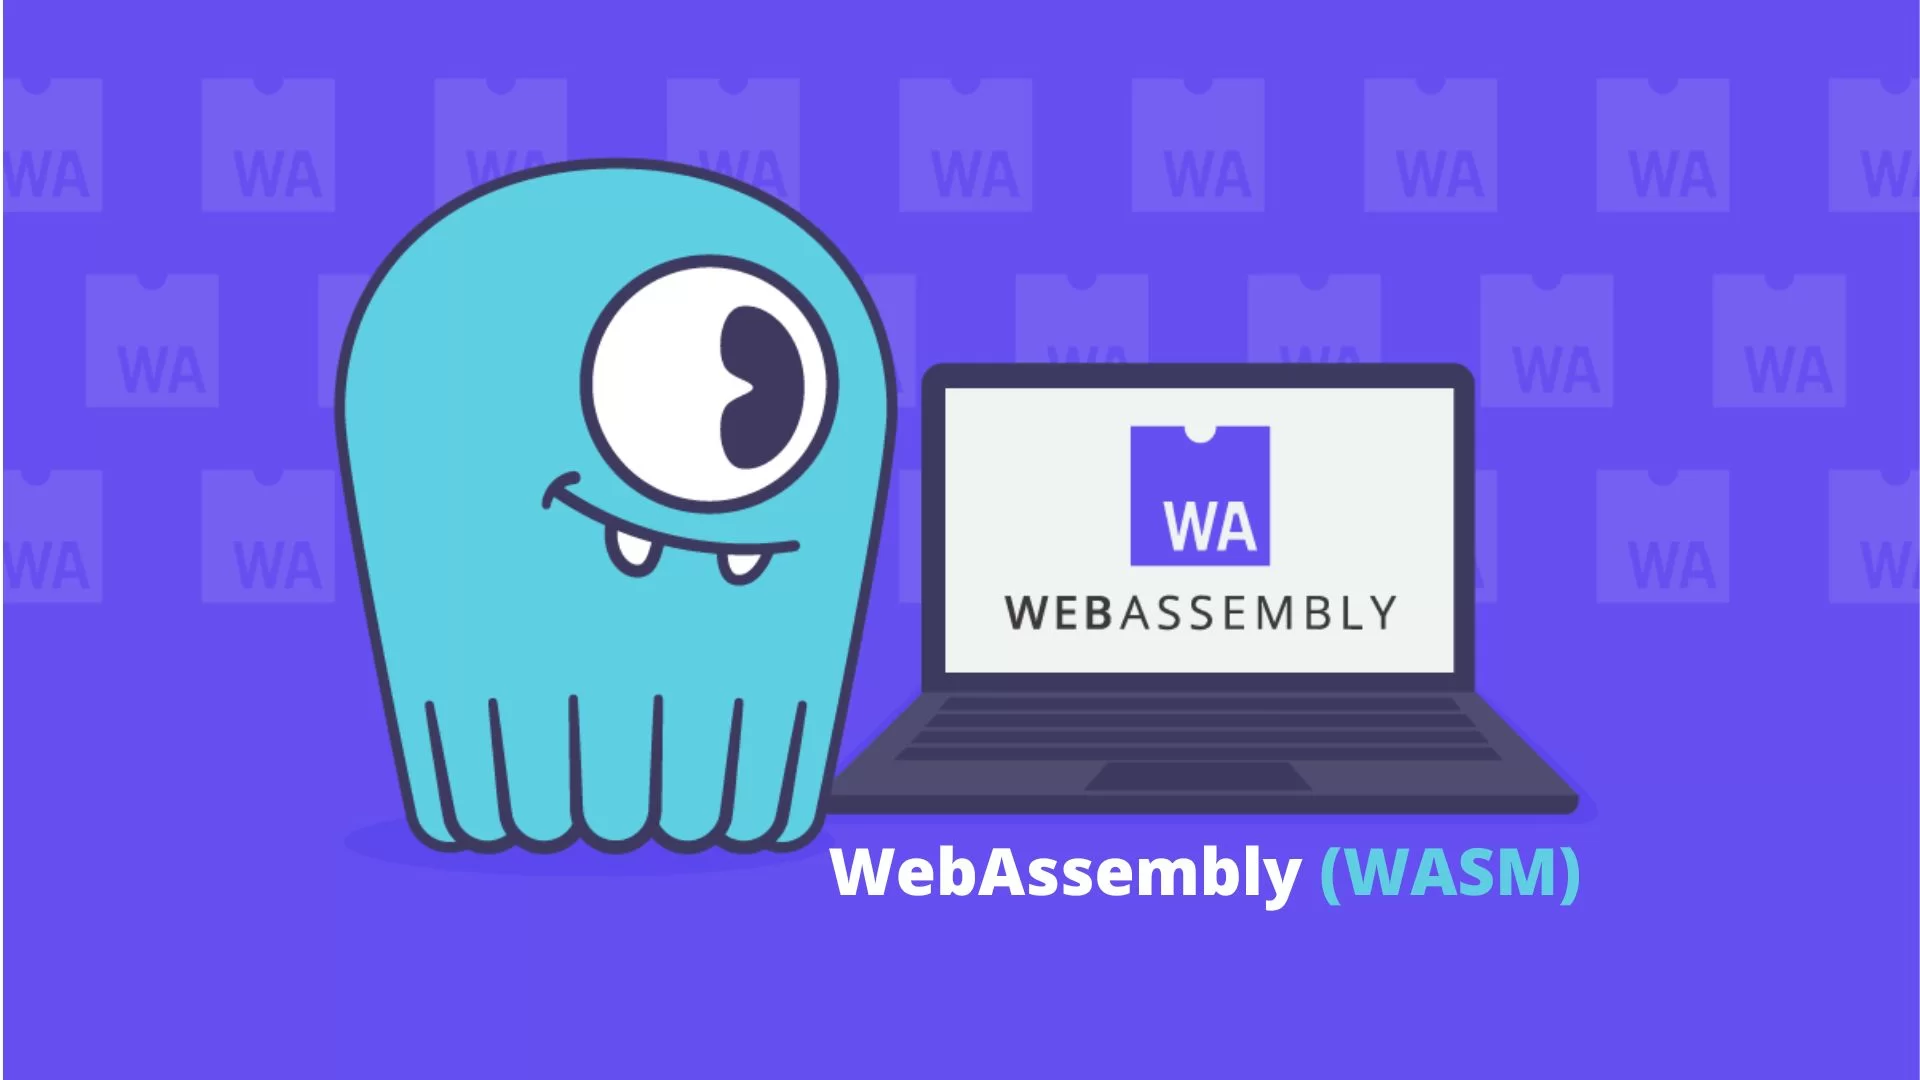 How WebAssembly (WASM) Works